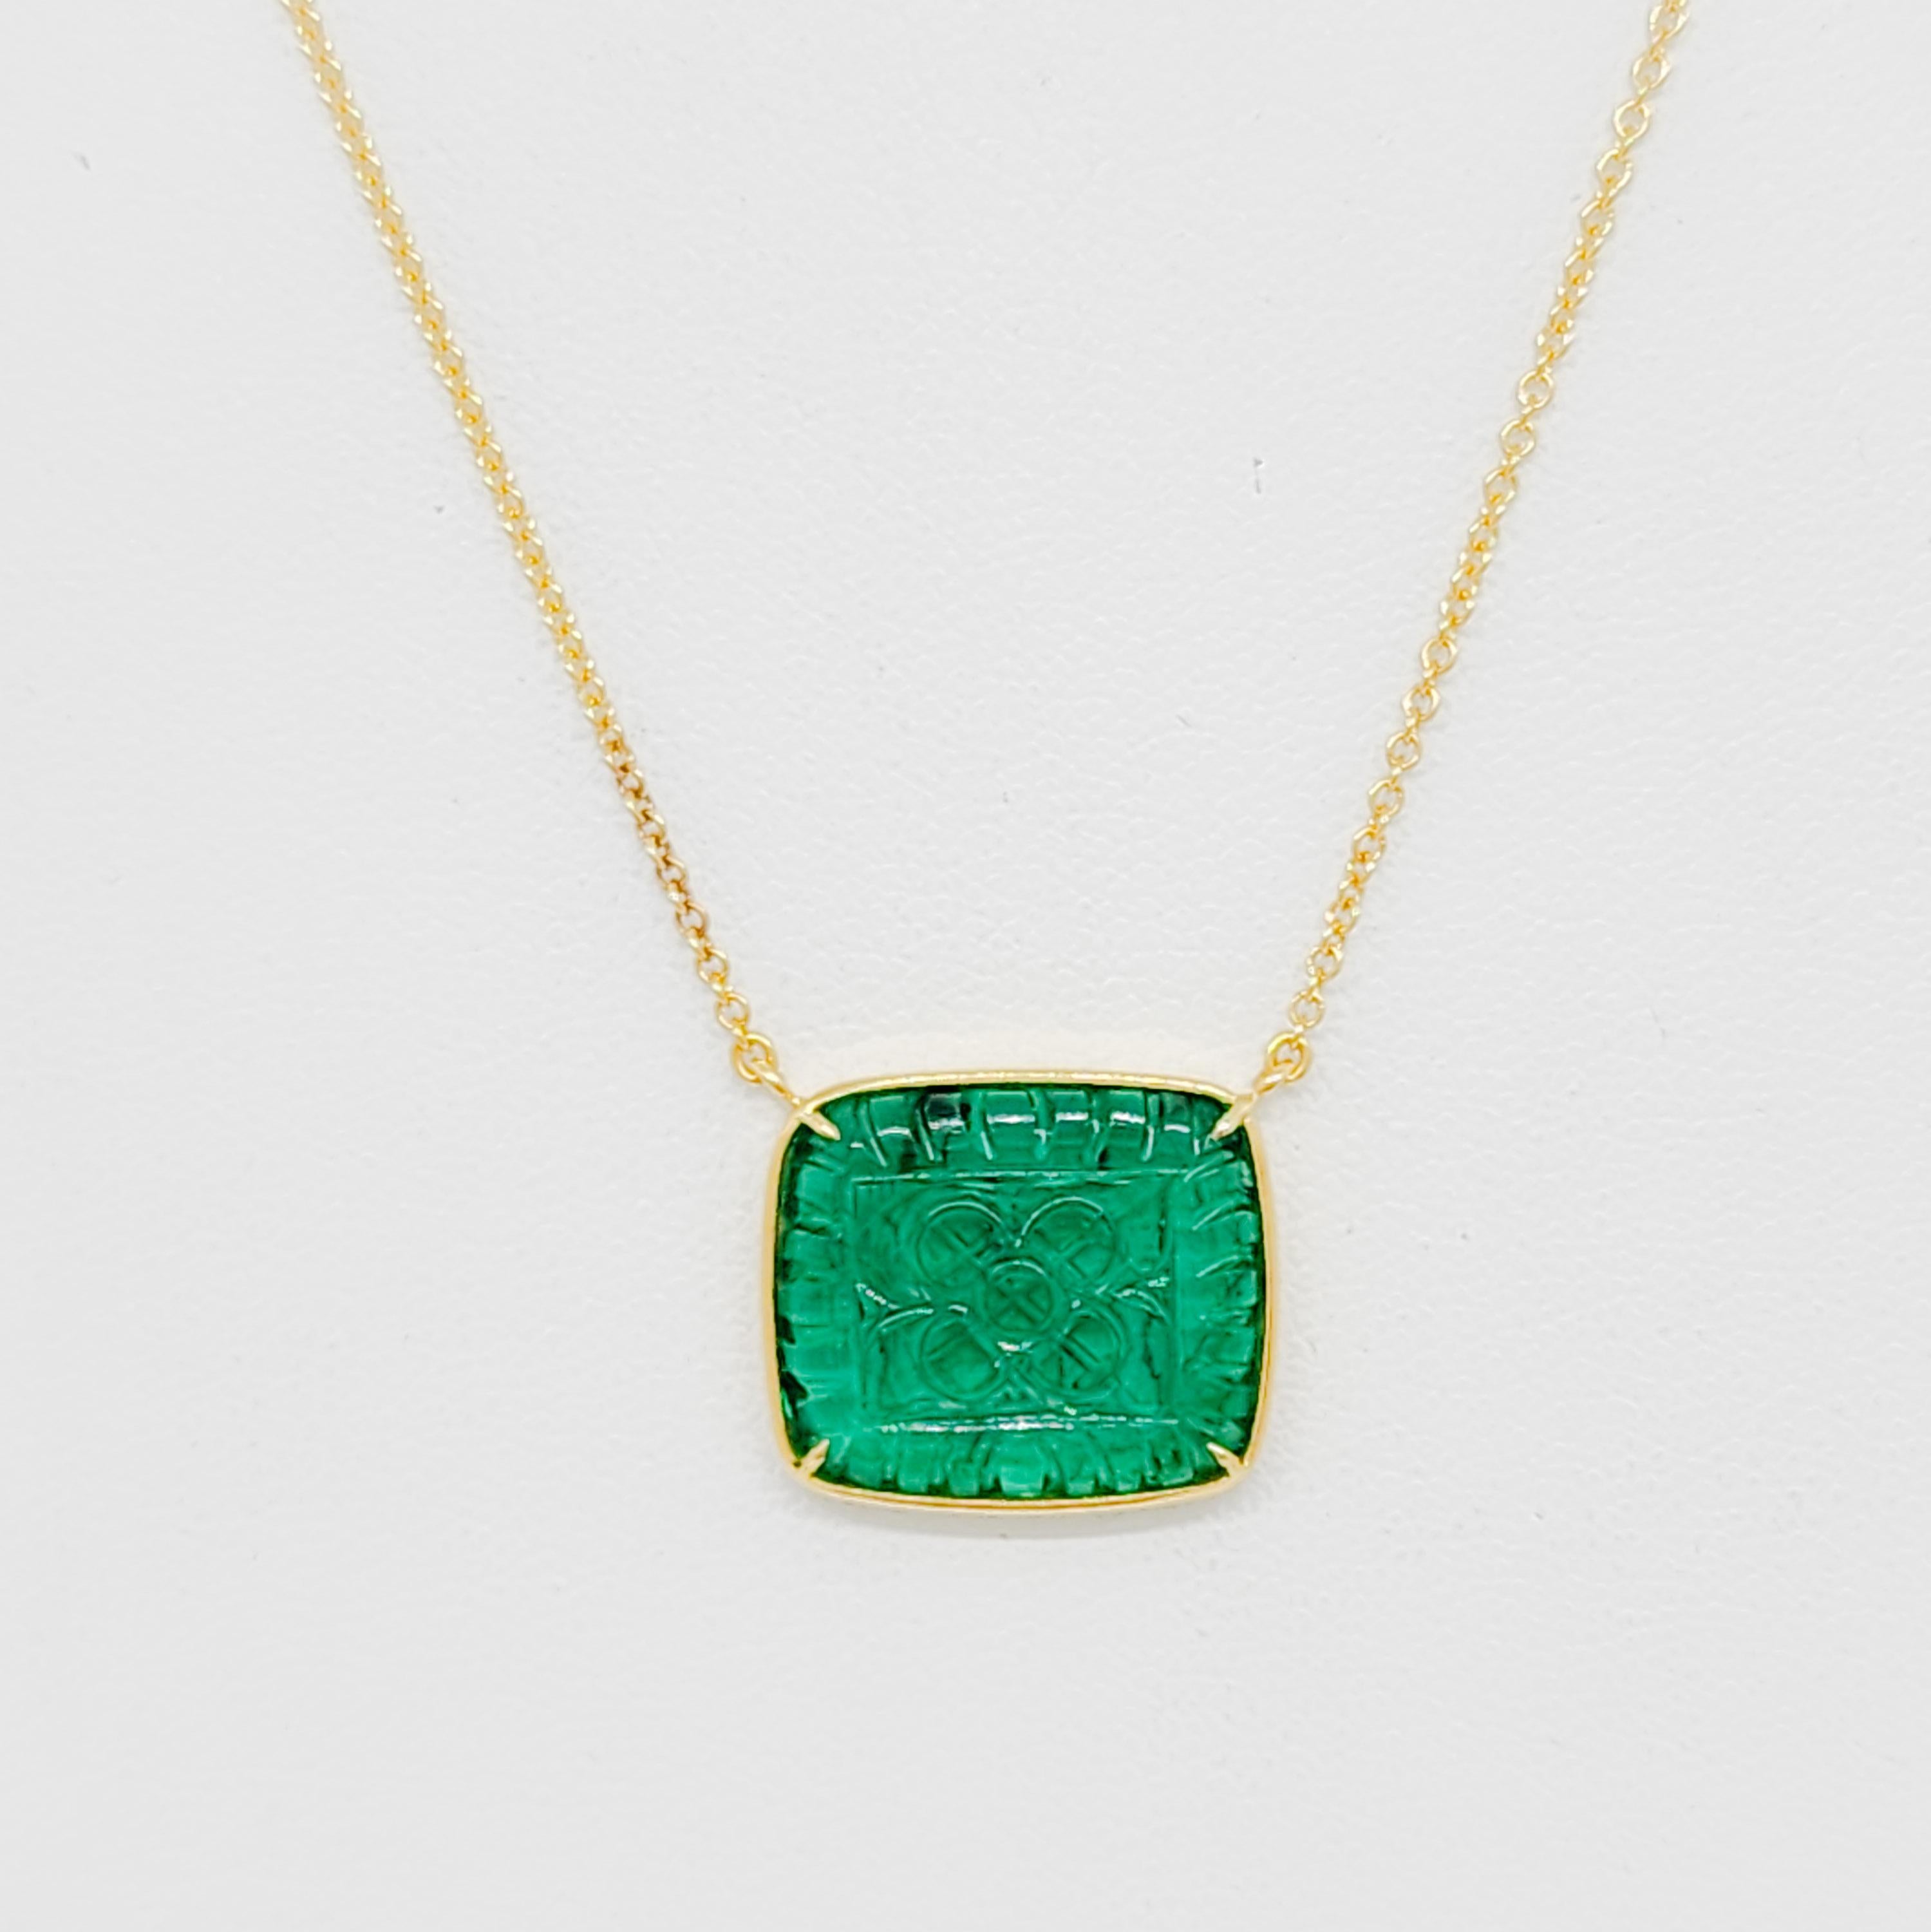 Beautiful 6.84 ct. carved emerald rectangle in a handmade 18k yellow gold bezel.  Length of chain is  18